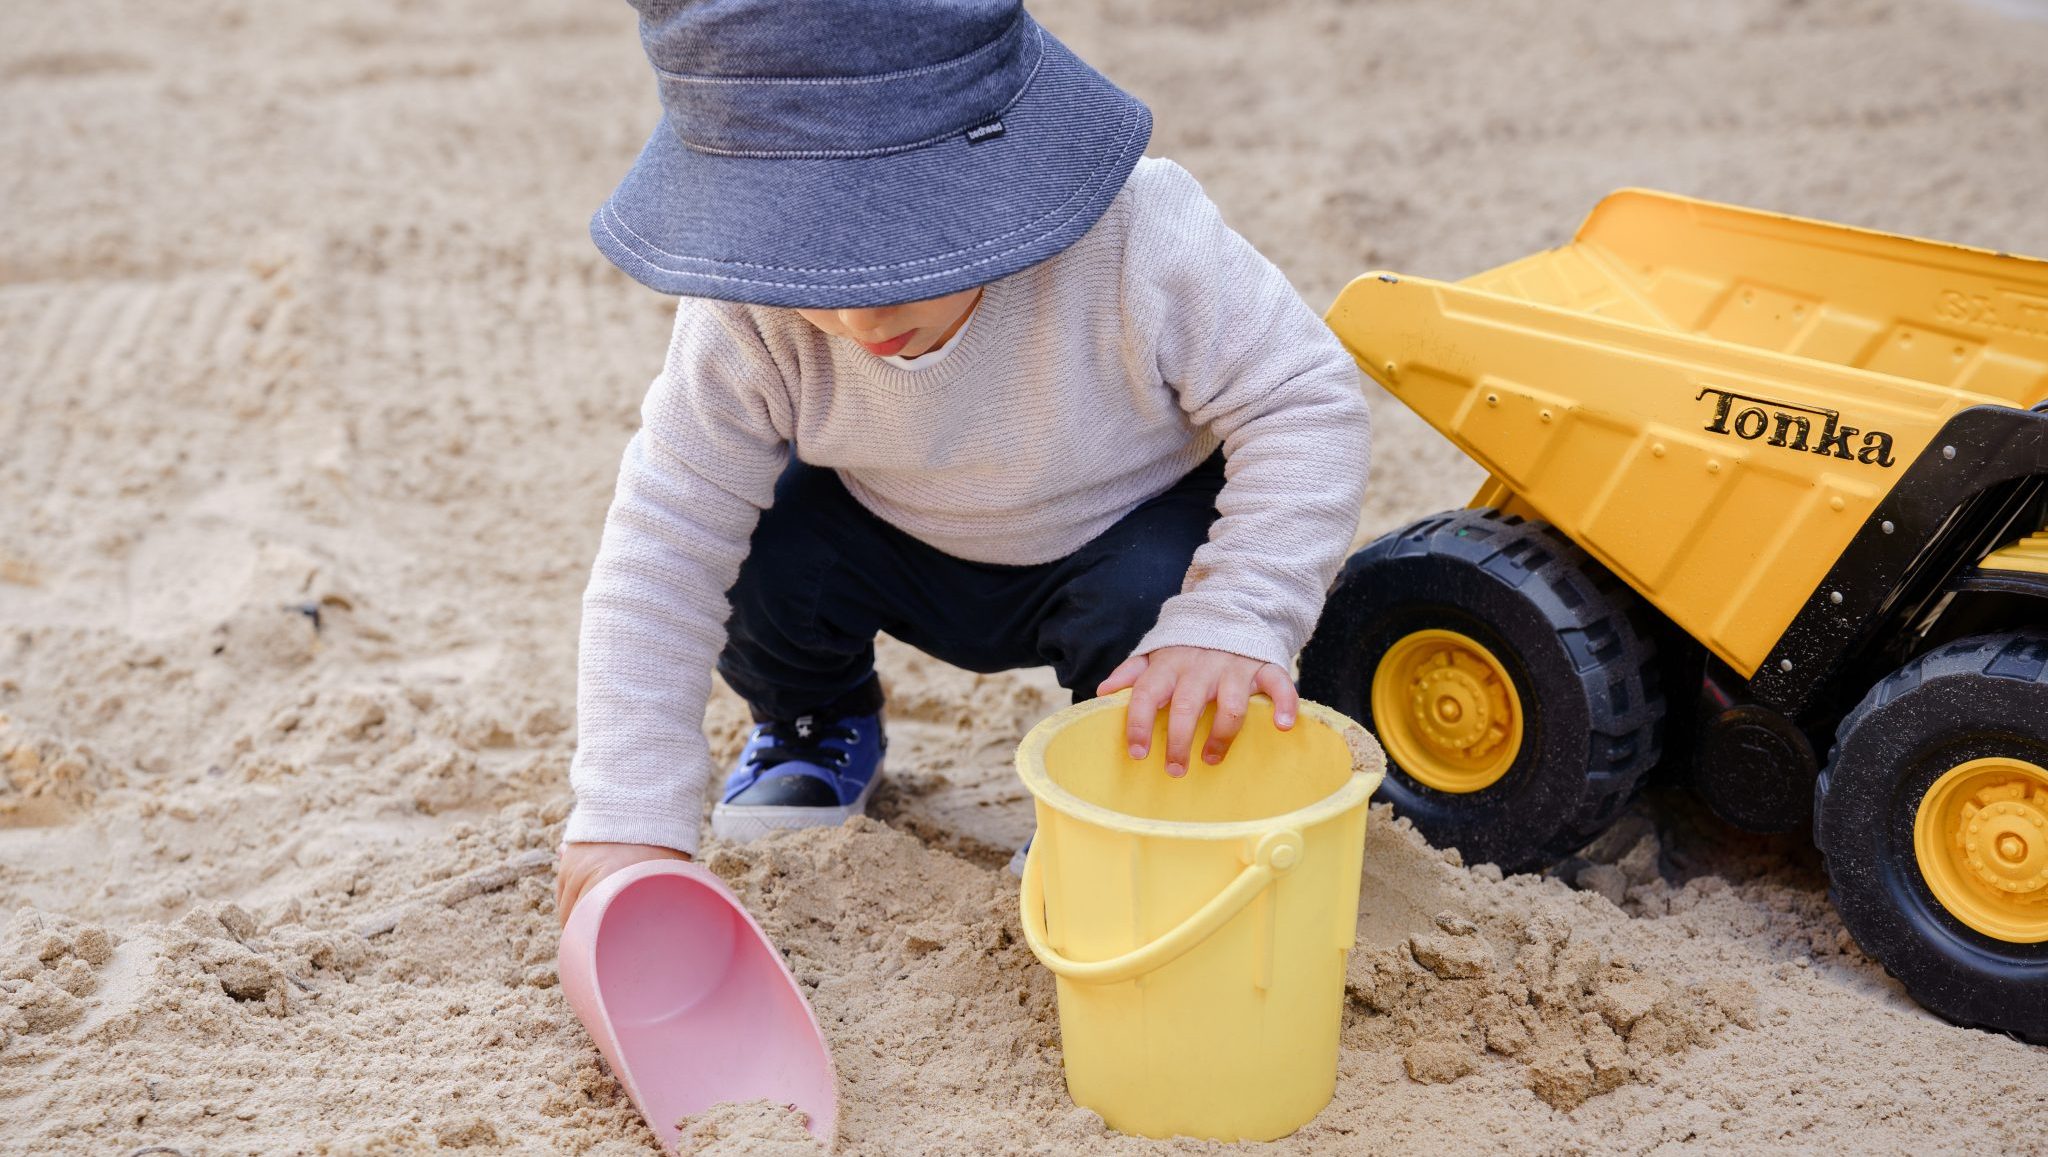 Explore & Develop, child playing in sandpit with bucket and truck